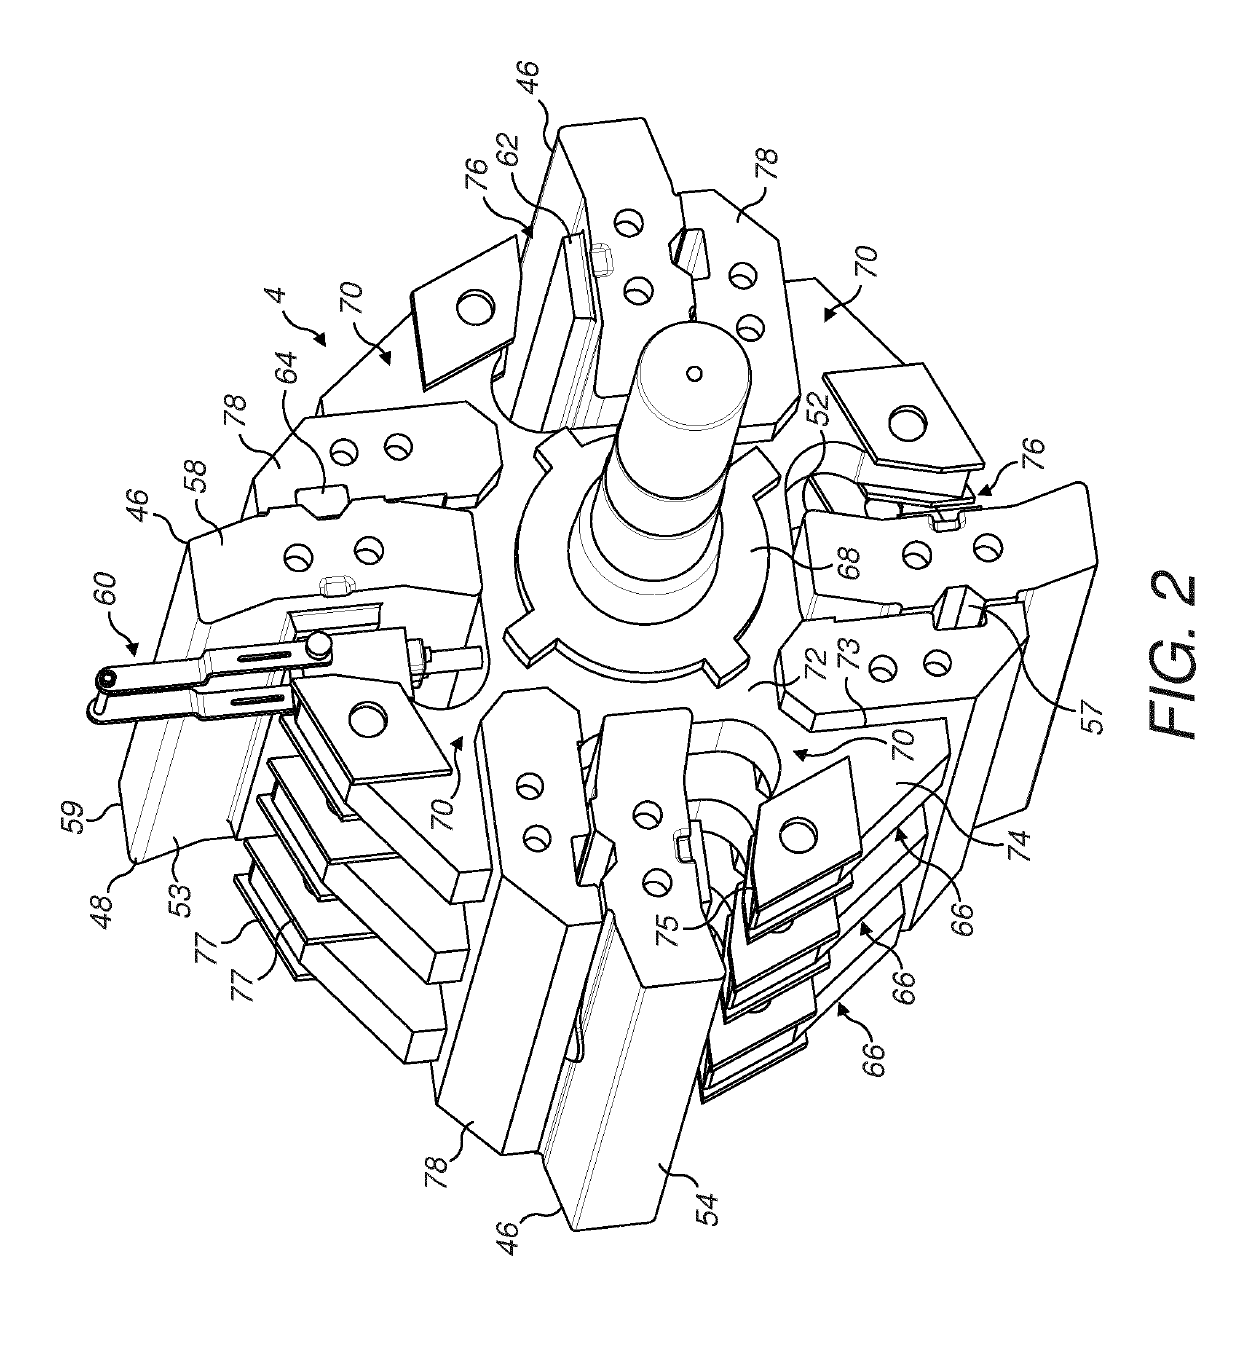 Locking device including an installation handle for locking a hammer to a rotor in a horizontal shaft impact crusher